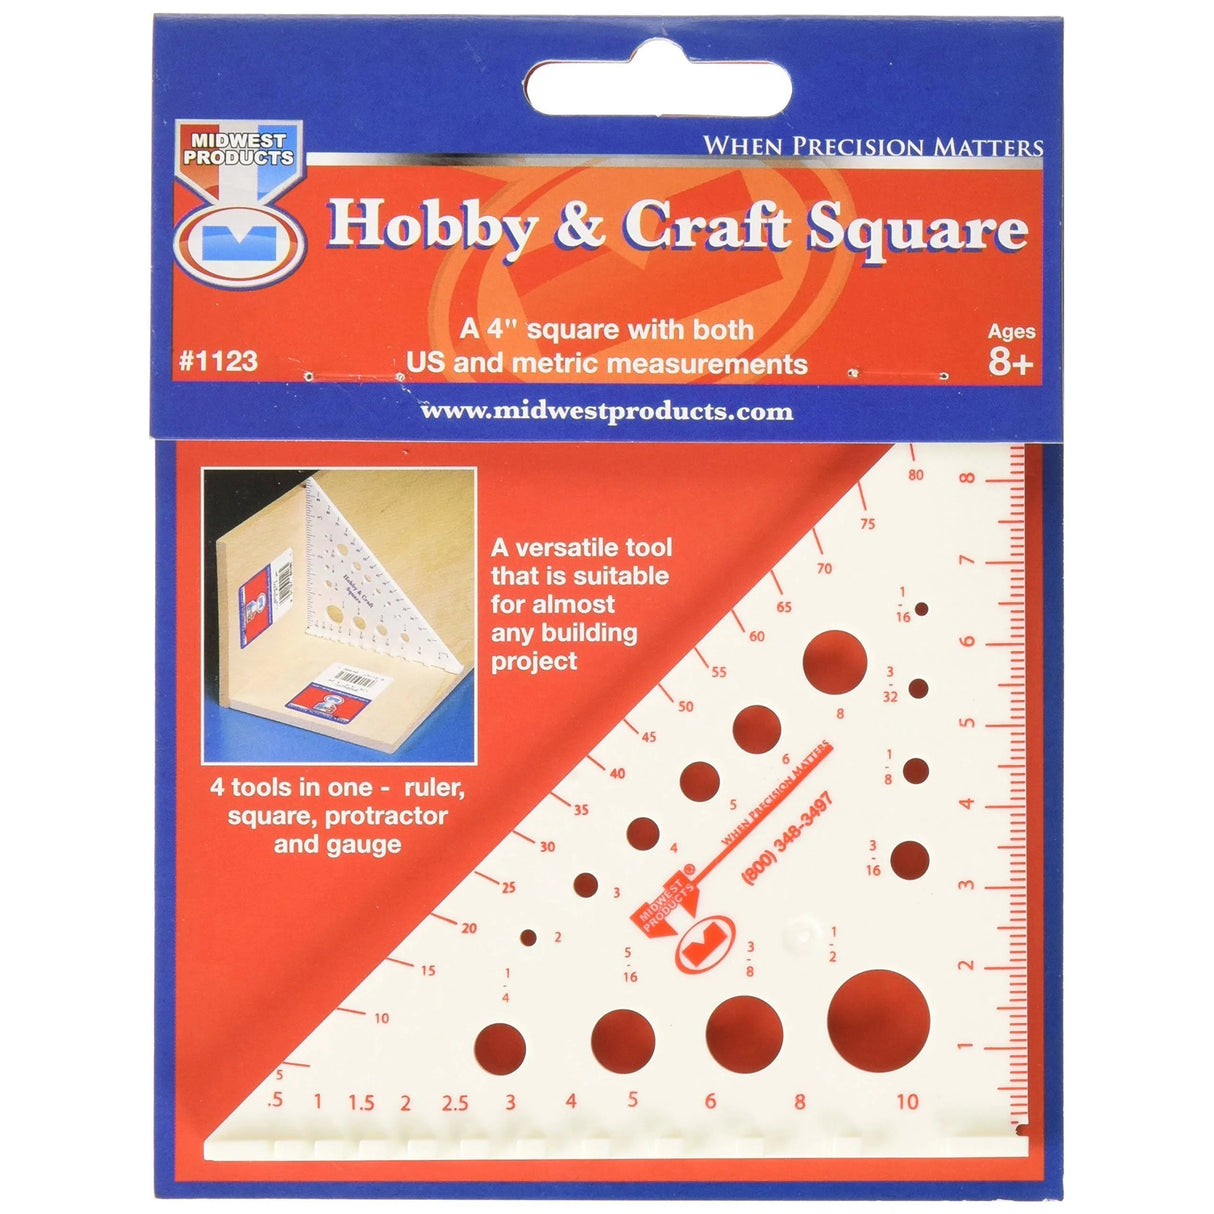 Midwest Products Hobby And Craft Square